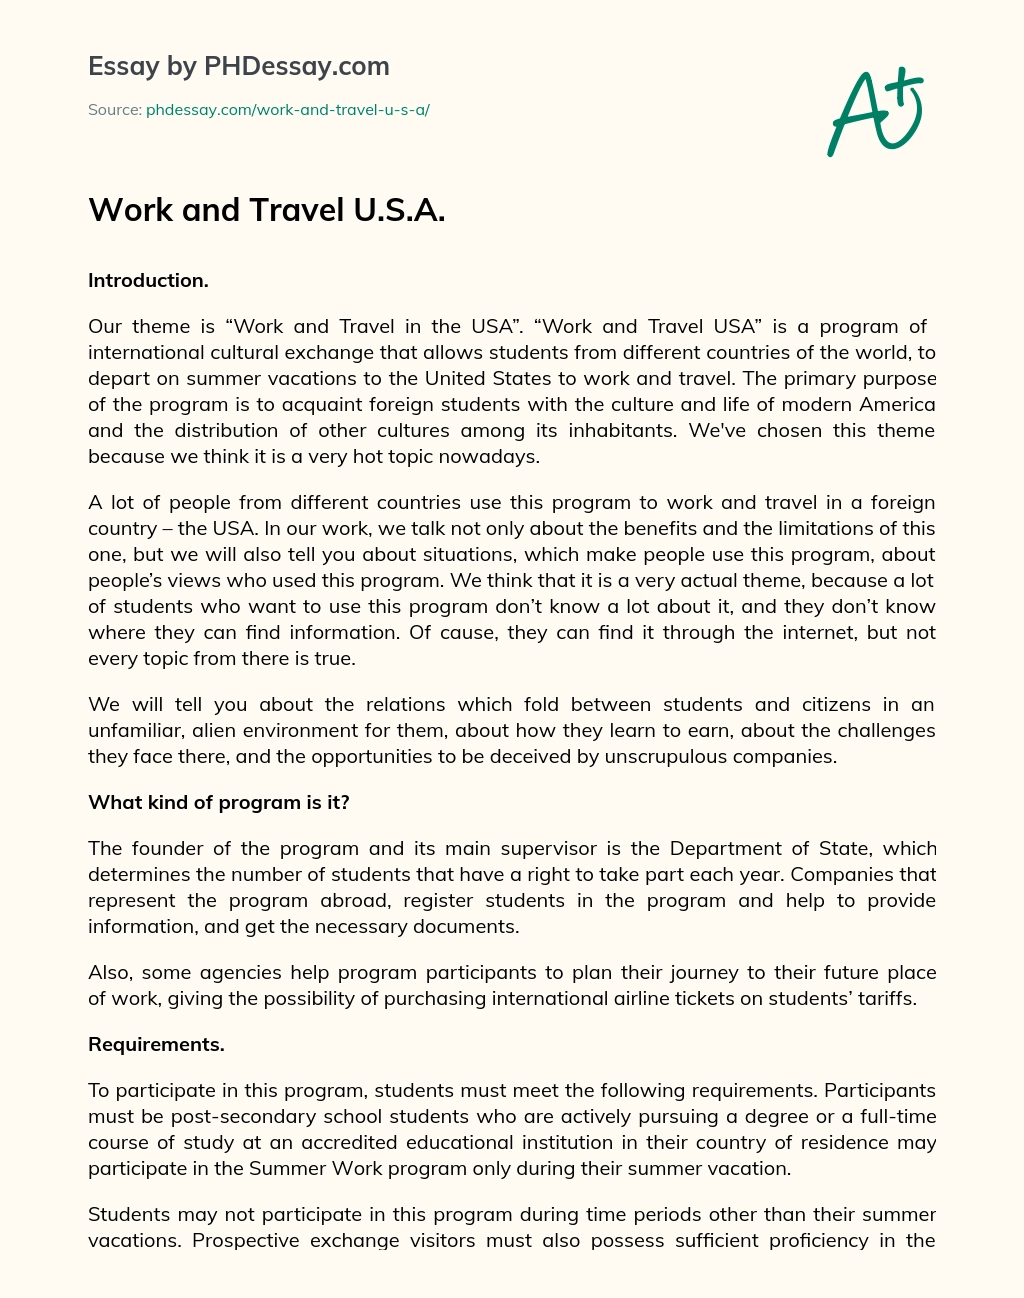 Work and Travel U.S.A. essay